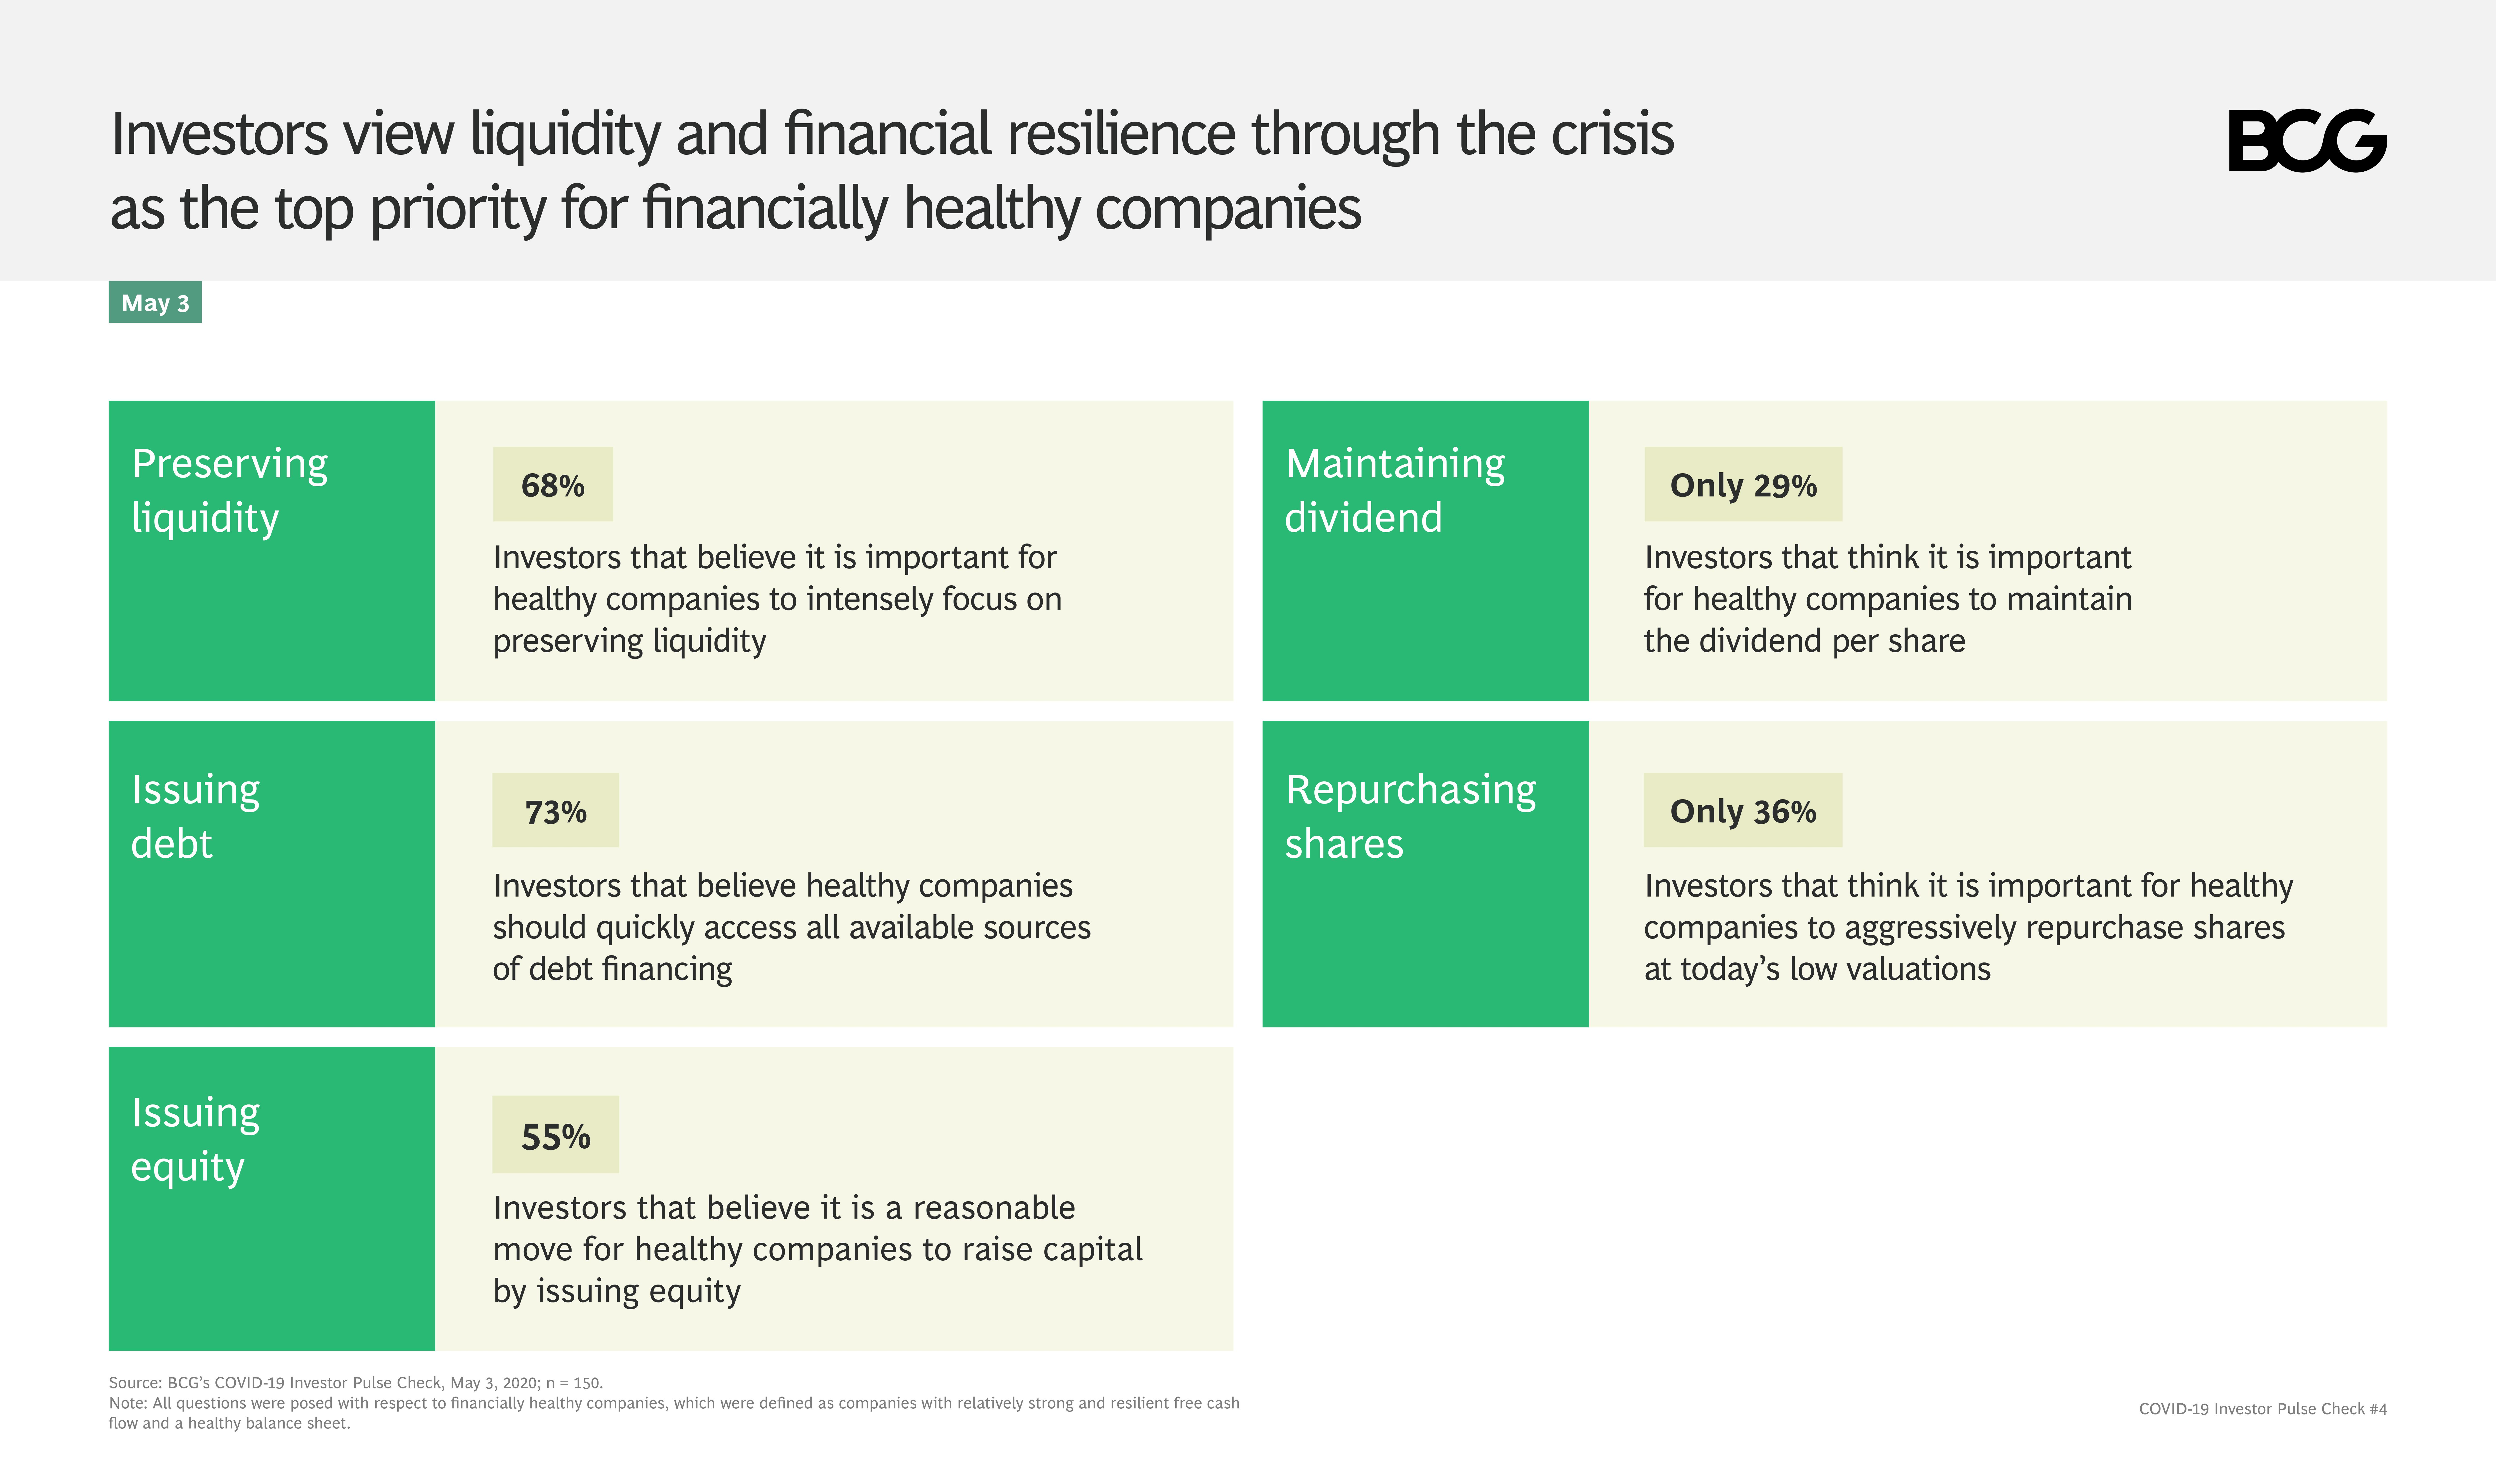 Investors view liquidity and financial resilience through the COVID-19 crisis as the top priority for financially healthy companies.